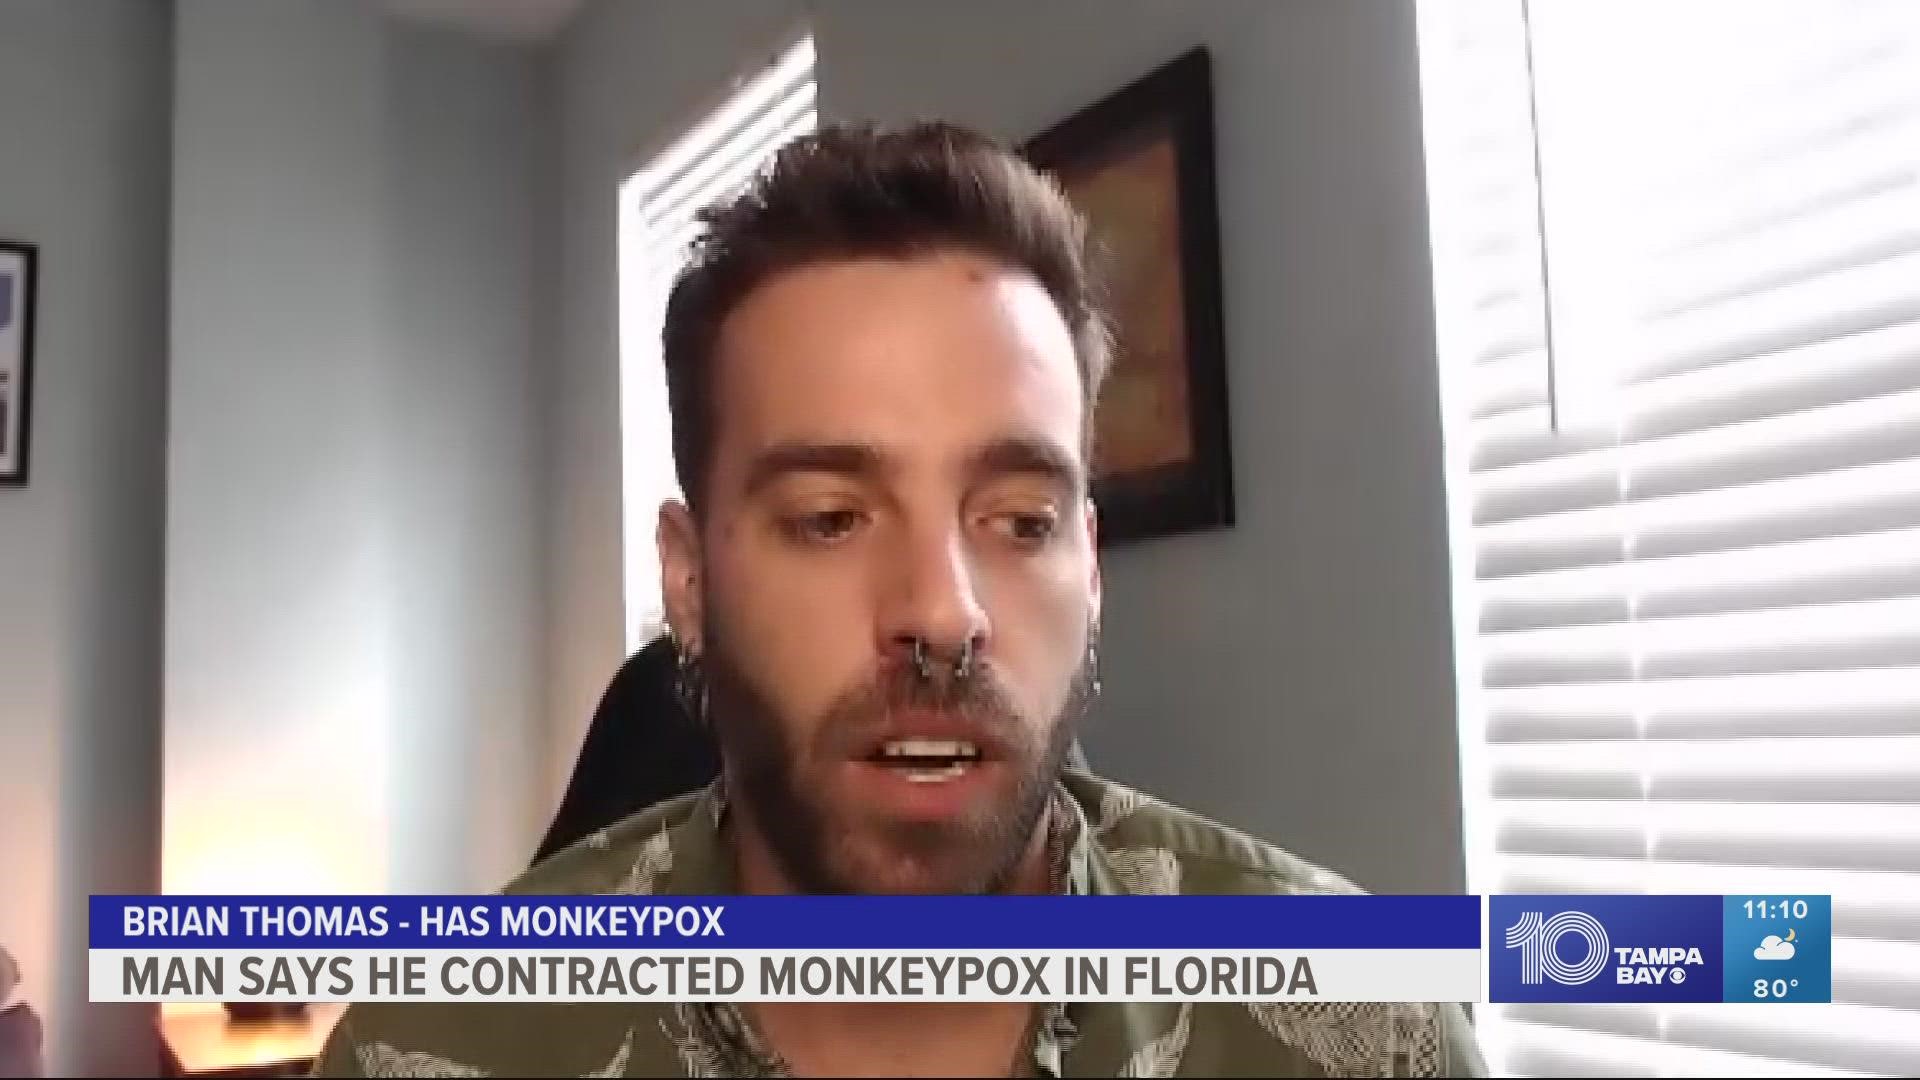 Brian Thomas, a nurse, tested positive for monkeypox after attending Ft. Lauderdale Pride. He is now using social media to spread awareness about the disease.